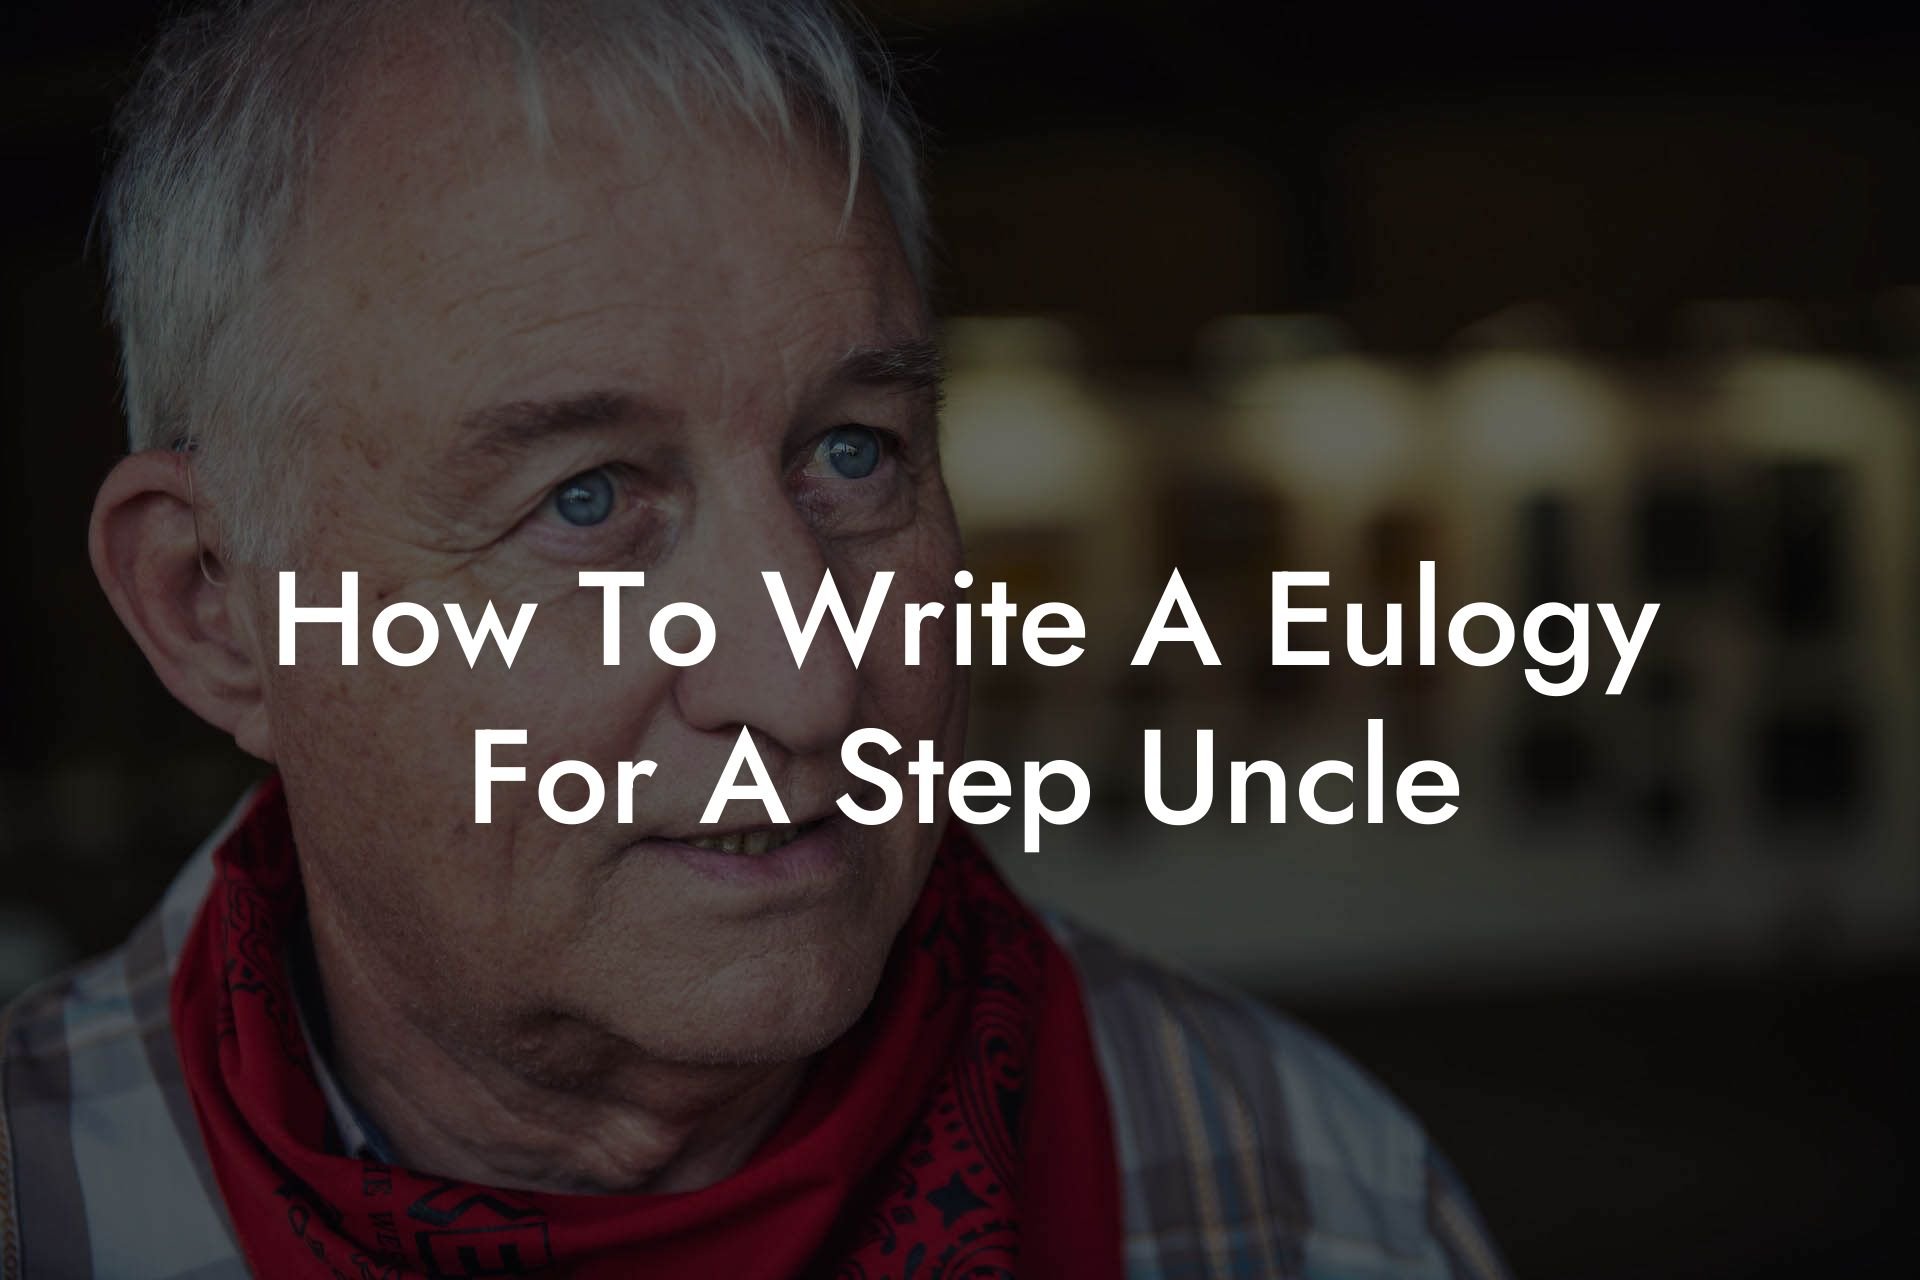 How To Write A Eulogy For A Step Uncle